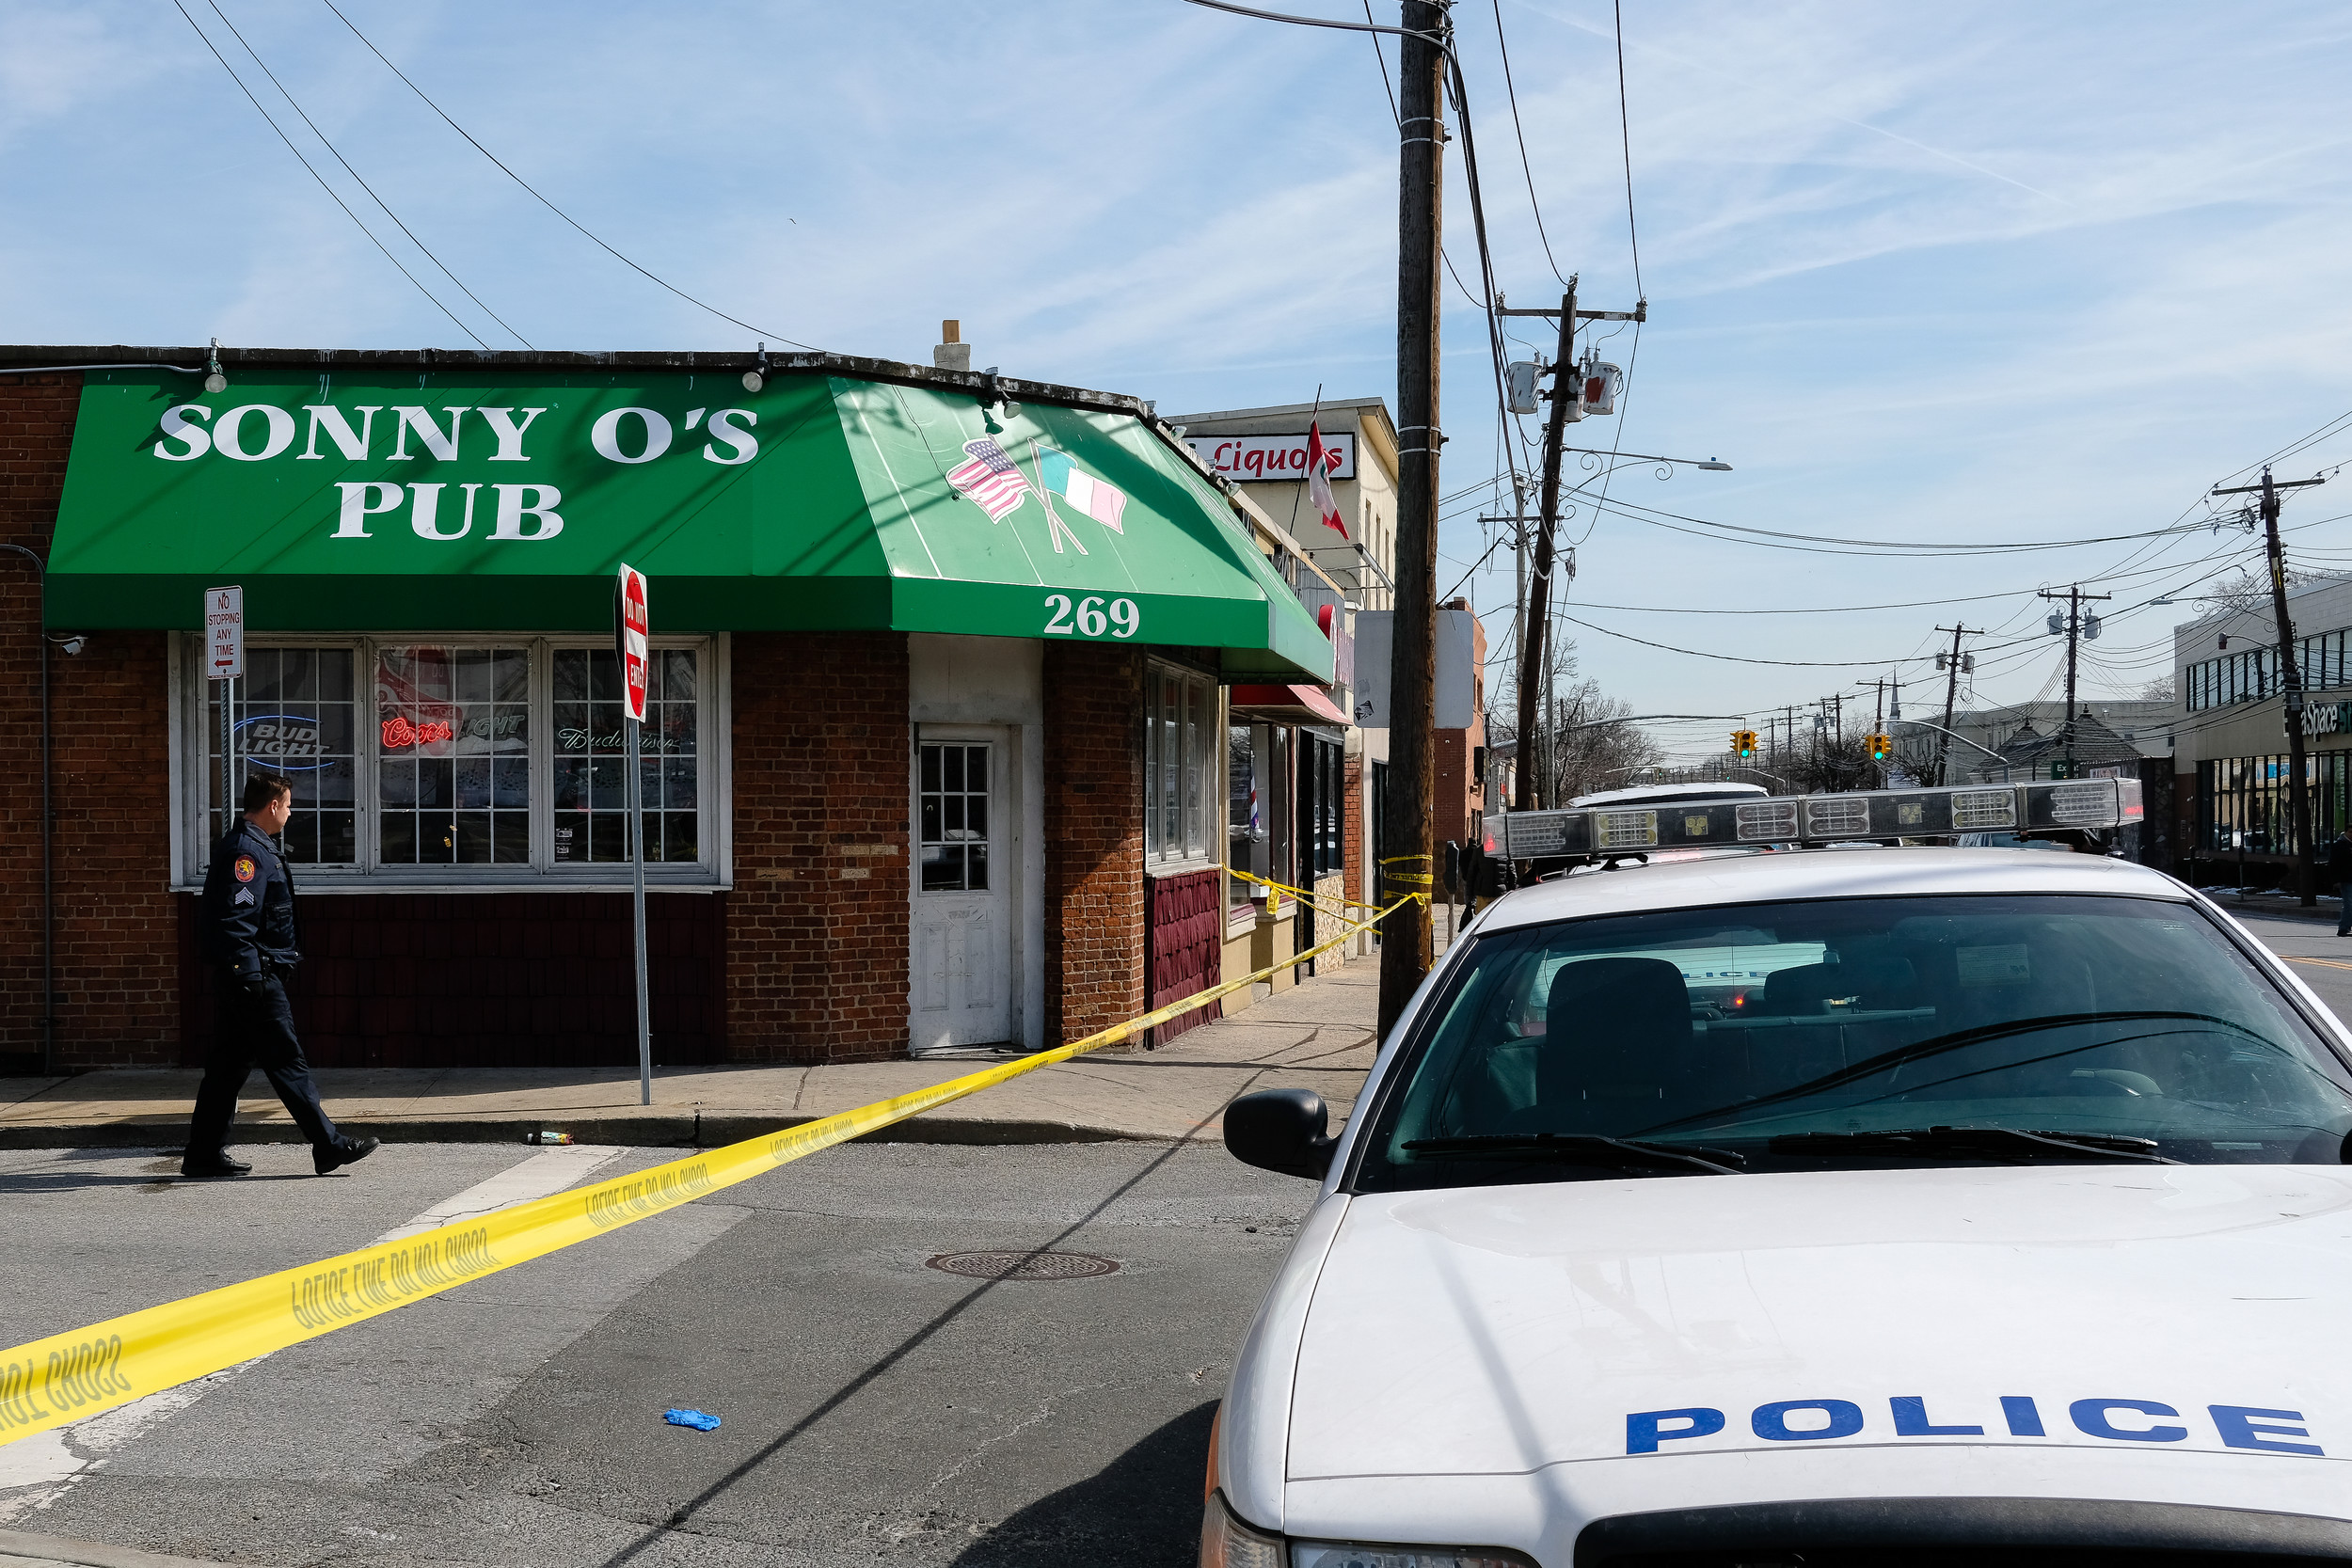 Nassau County police on the scene at Sonny O's Pub on March 13, where a man was shot and killed.